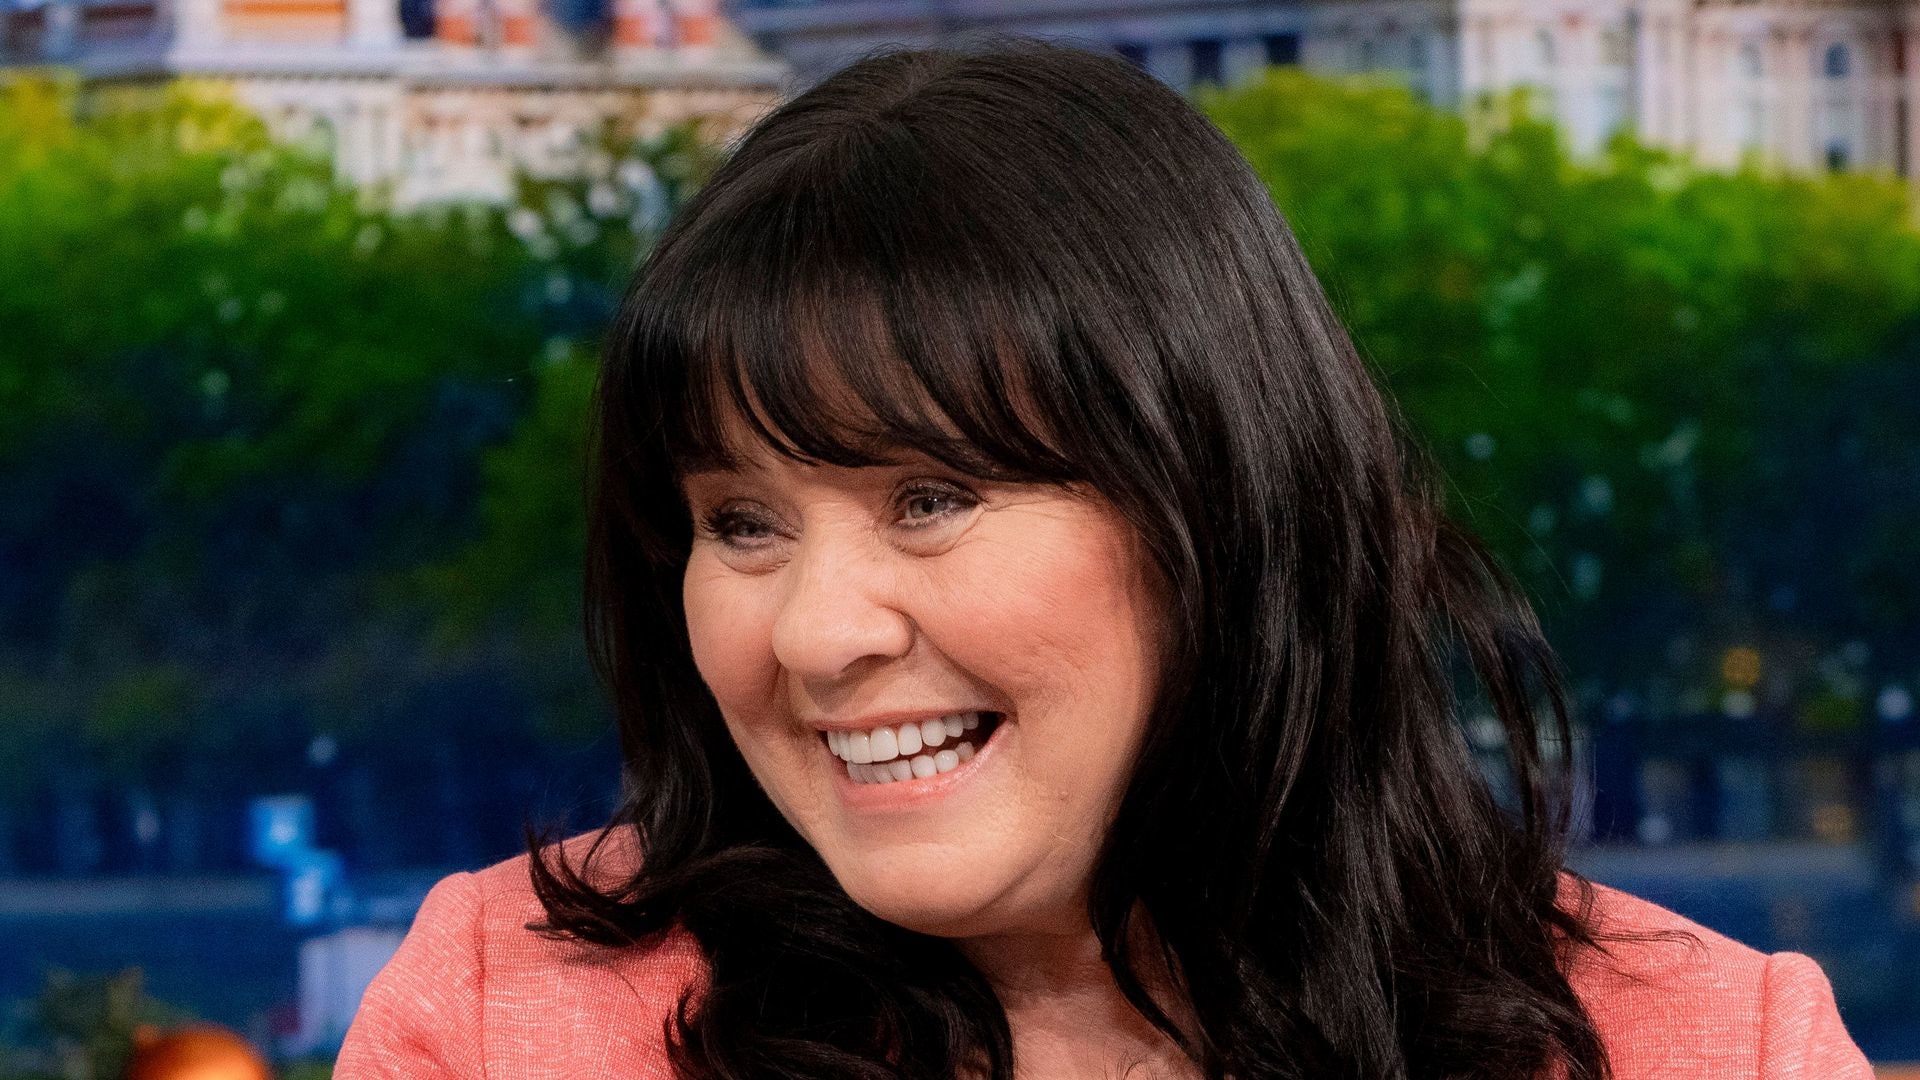 Coleen Nolan smiling in a peach jacket